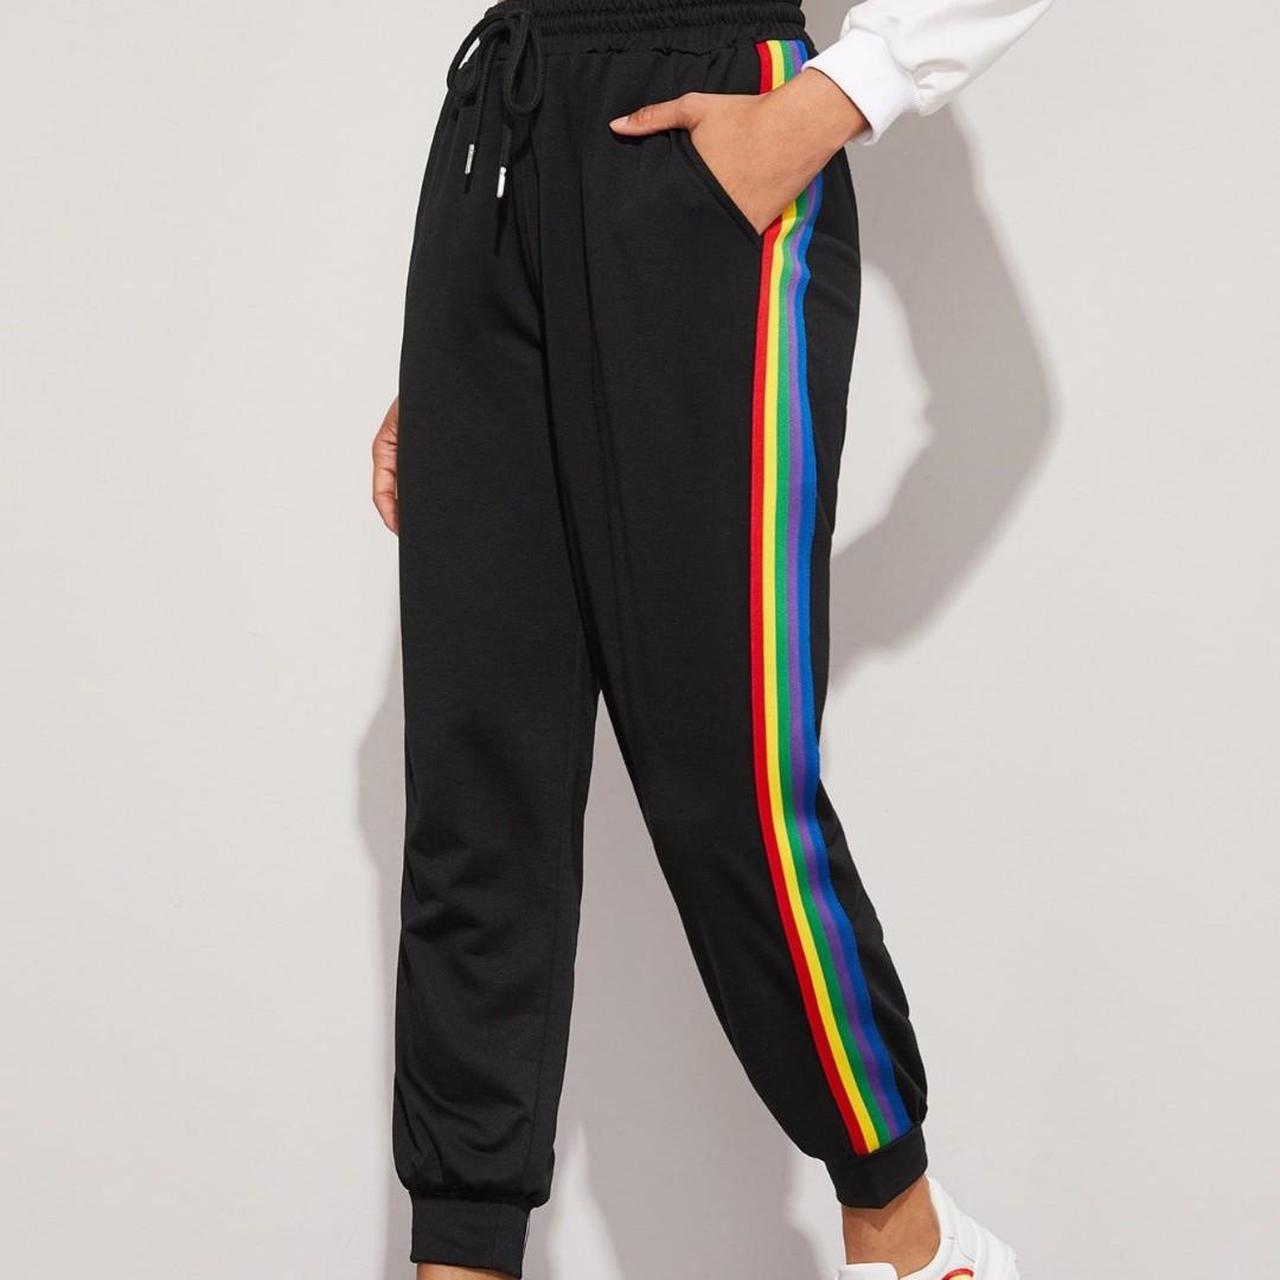 NEW SHEIN Side Stripe Black Jogger Tracksuit Athletic Pants Size Small